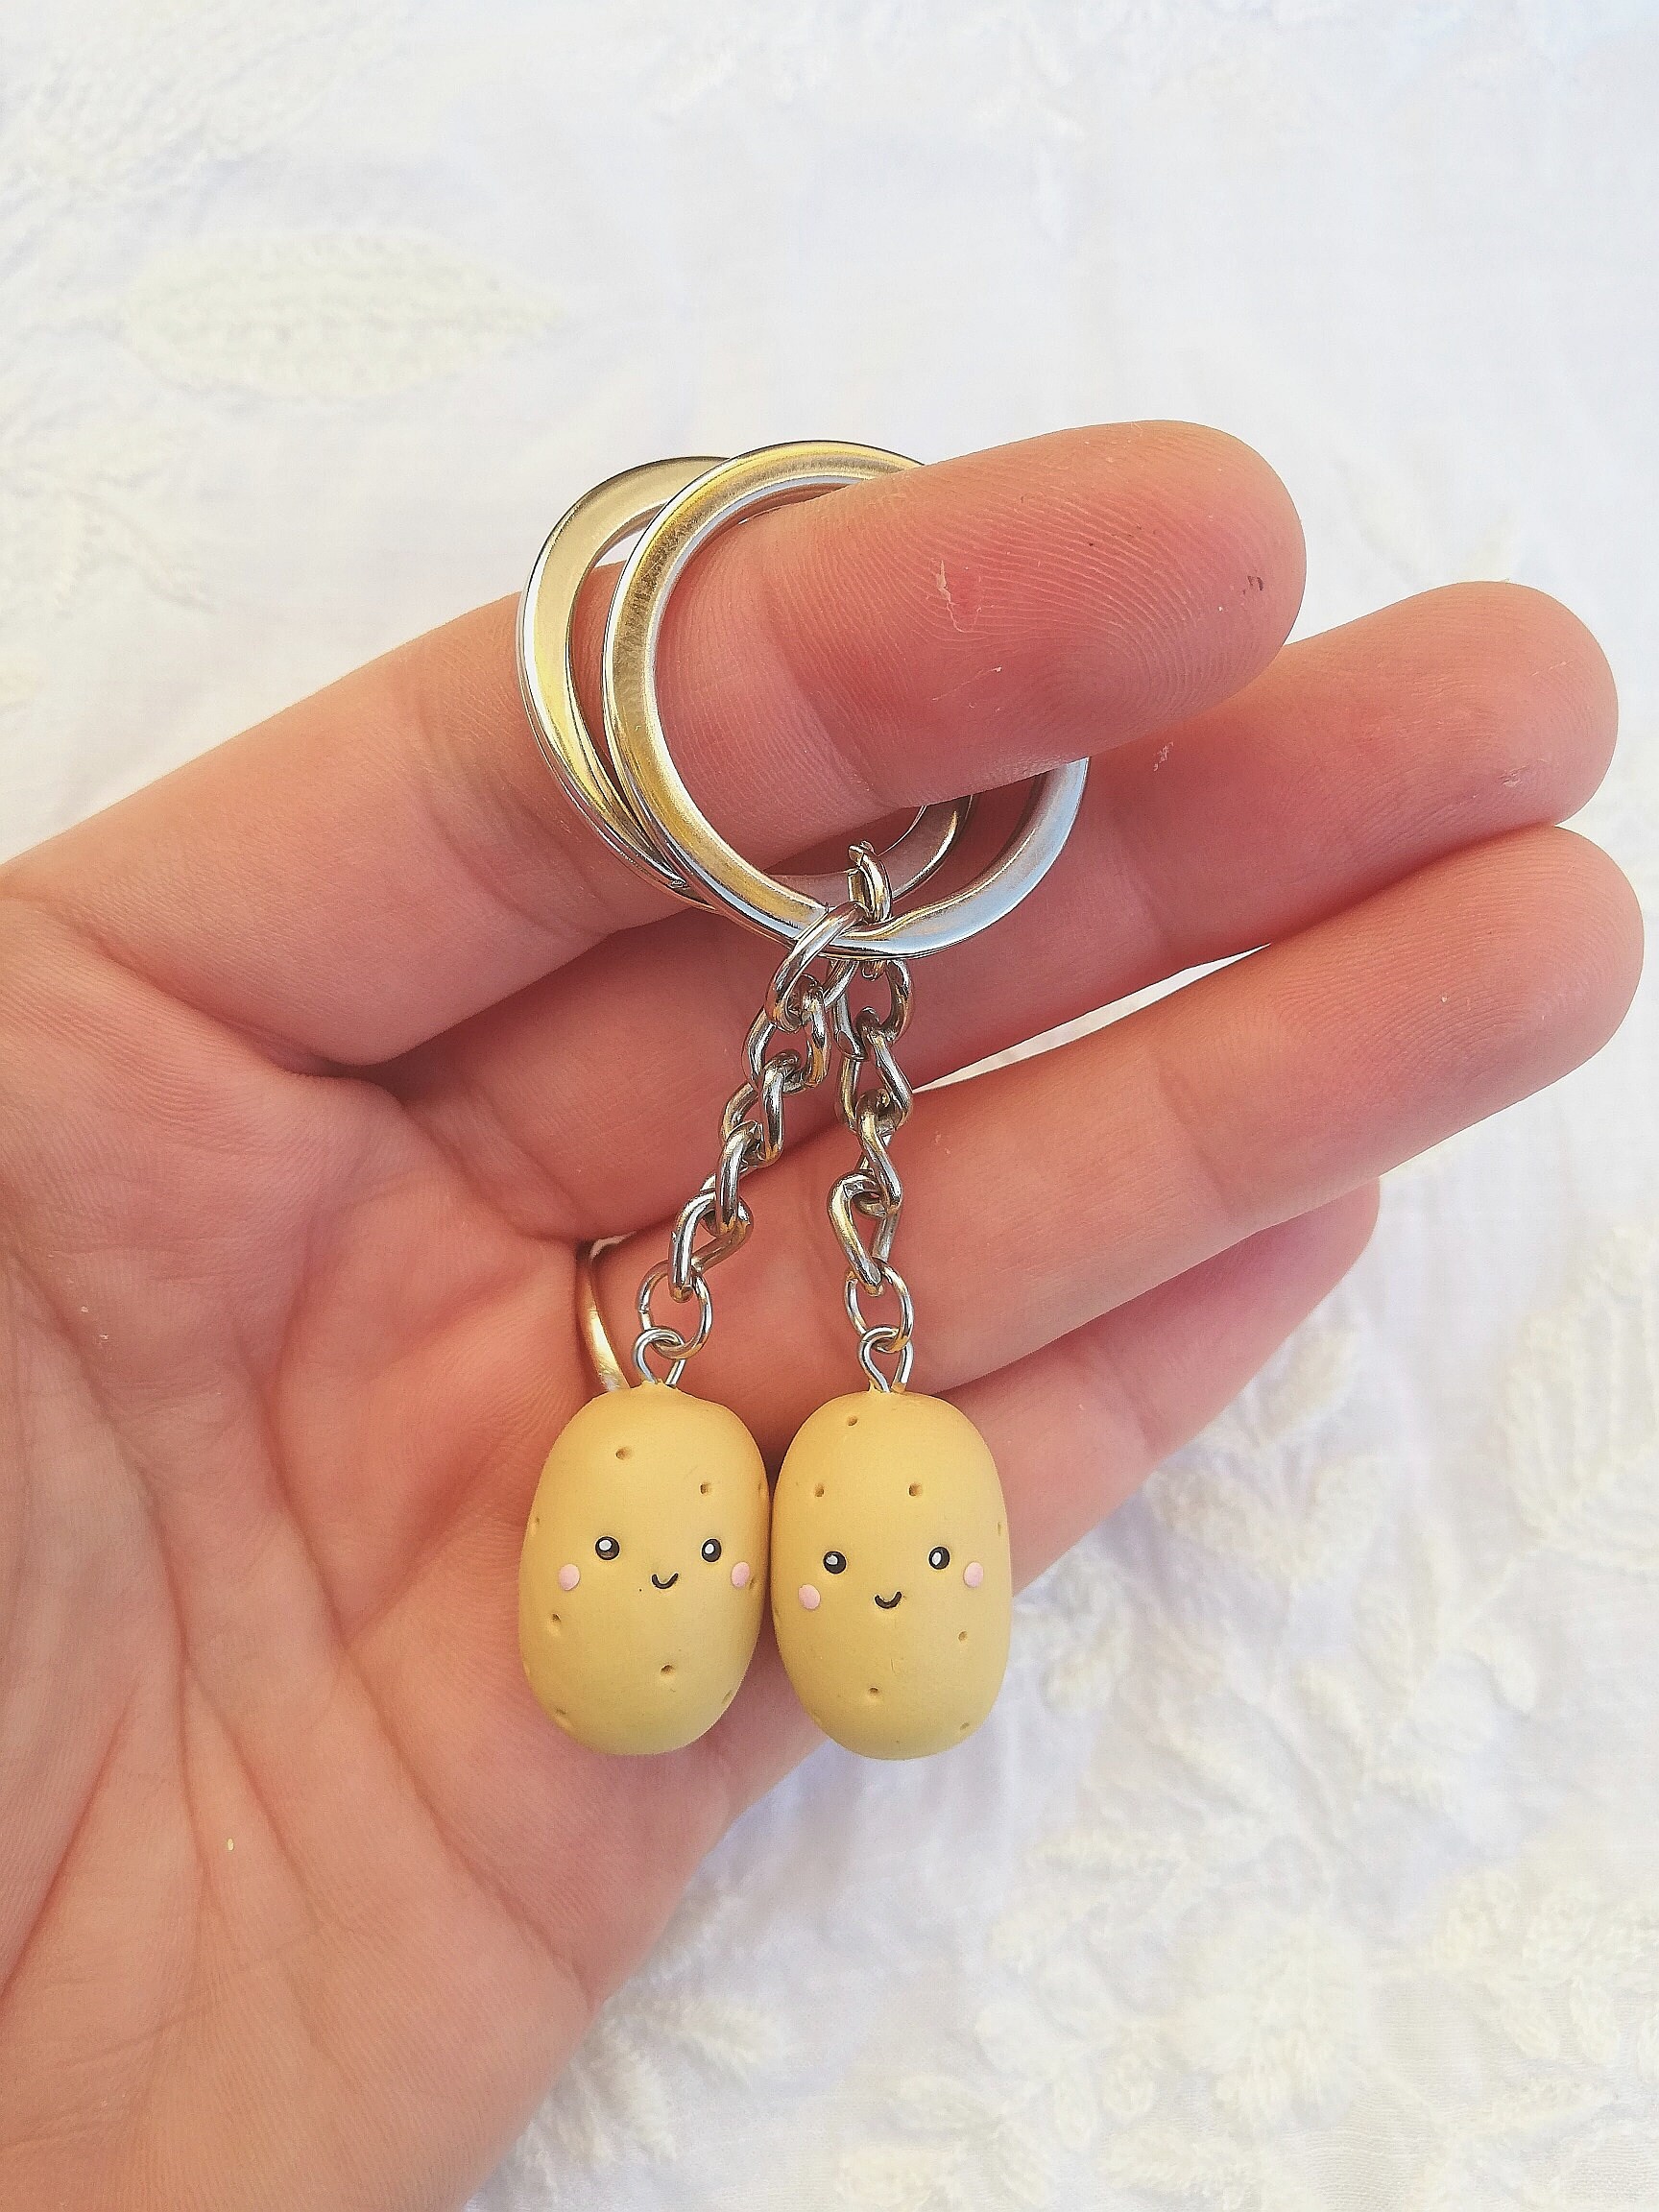 AOBIURV Positive Gifts For Women Men Positive Potato Keychain Gifts For  Friends Funny Friend Gift Best Friend Birthday Gifts Christmas Gifts For  Women